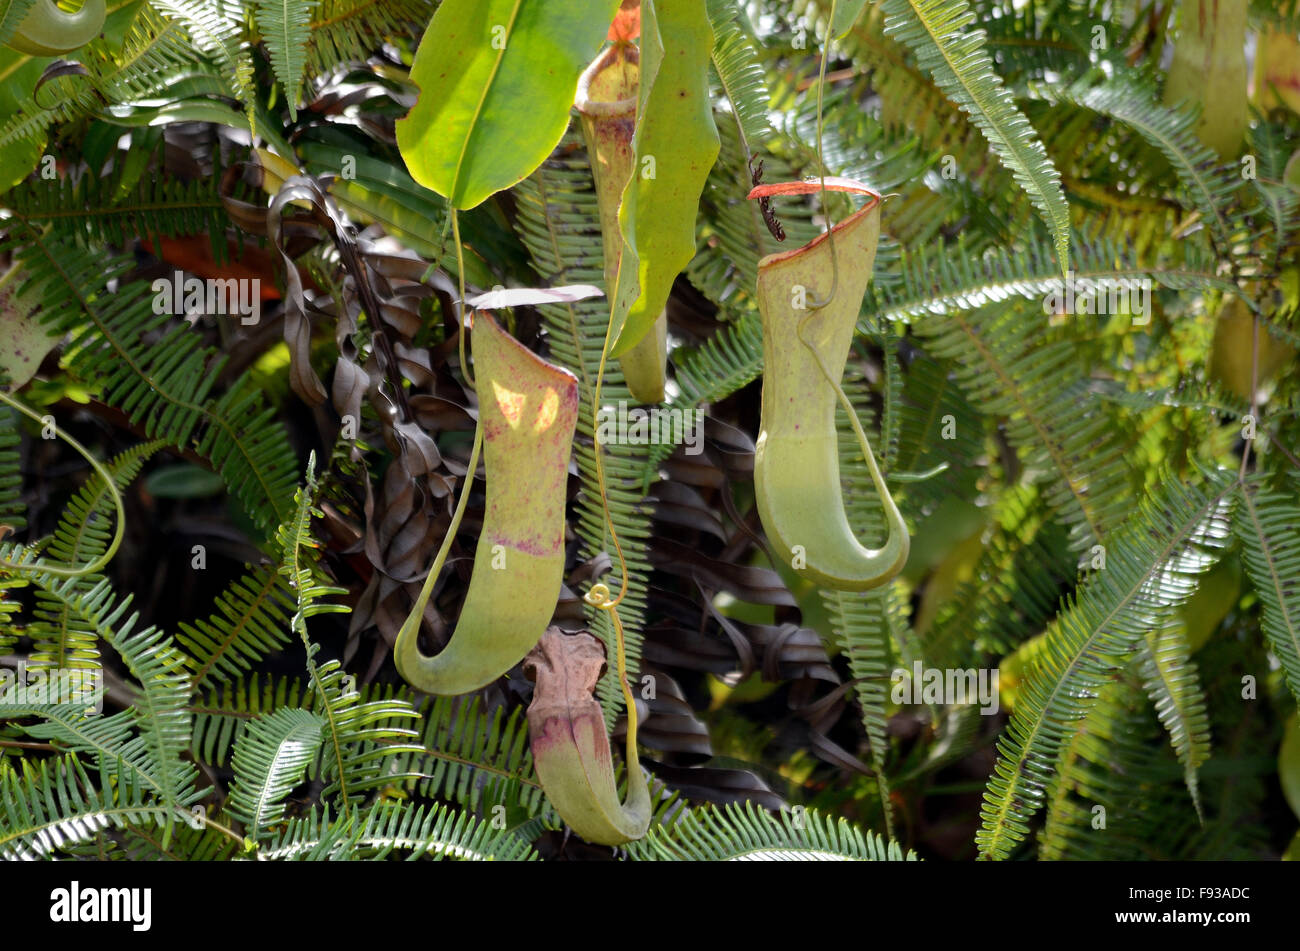 Nepenthes in the Borneo island Stock Photo